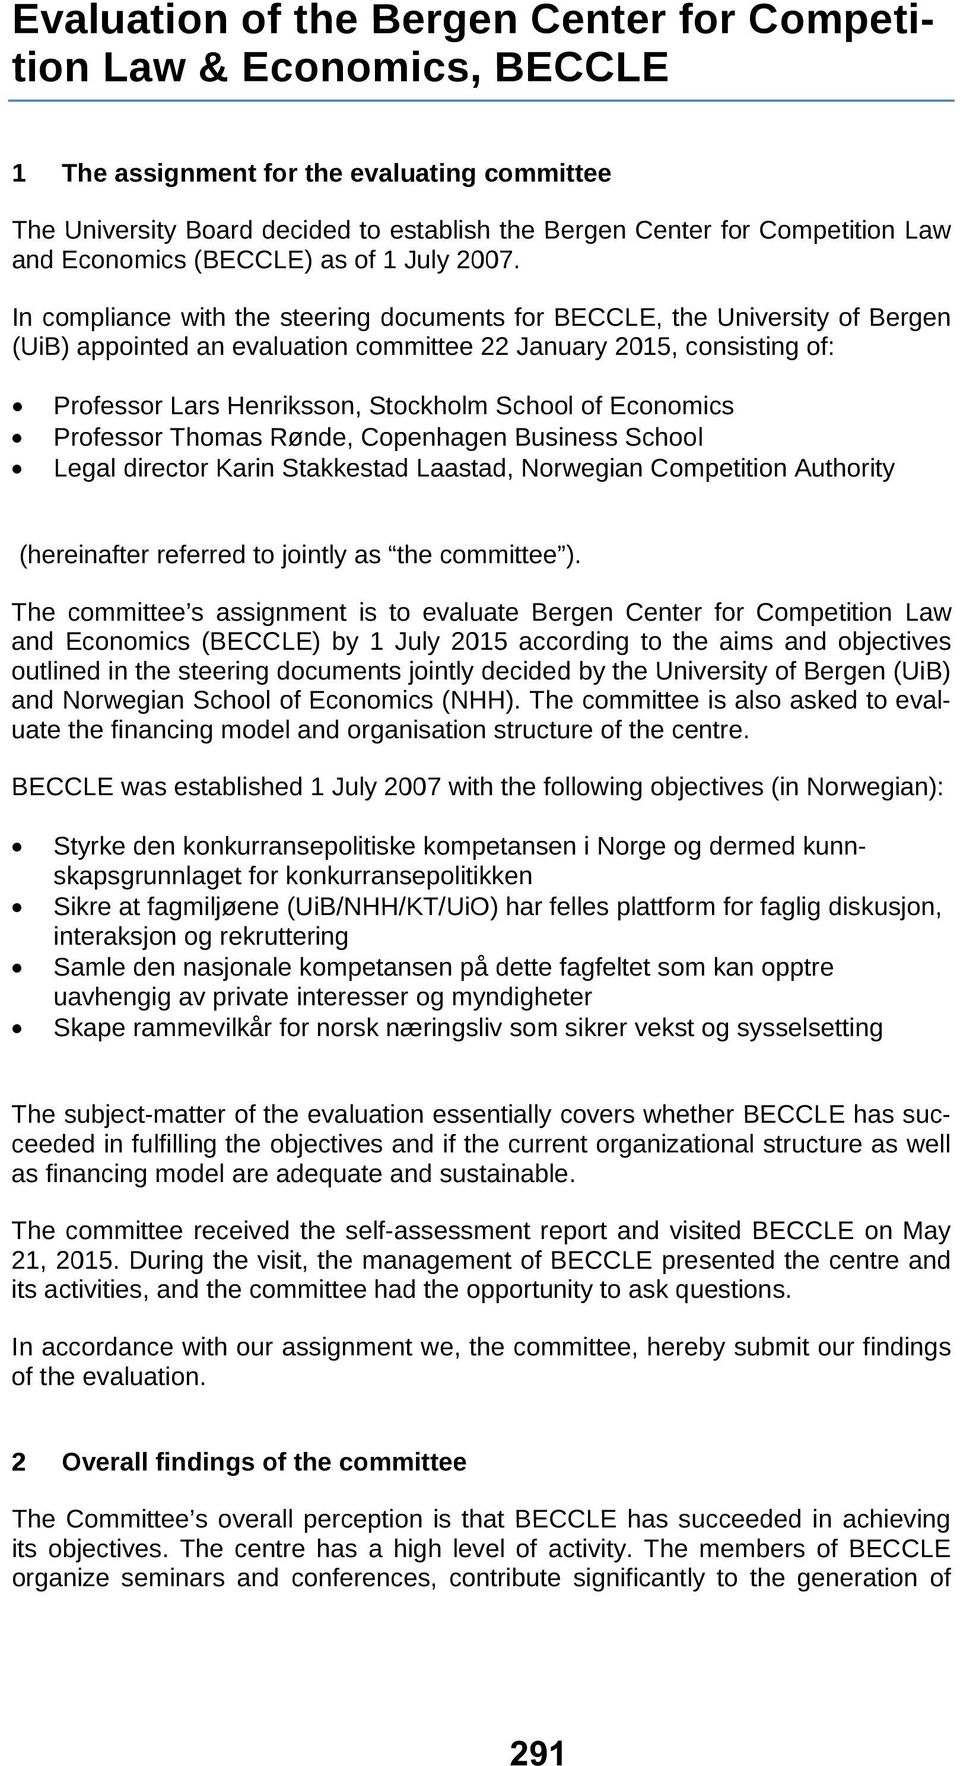 In compliance with the steering documents for BECCLE, the University of Bergen (UiB) appointed an evaluation committee 22 January 2015, consisting of: Professor Lars Henriksson, Stockholm School of